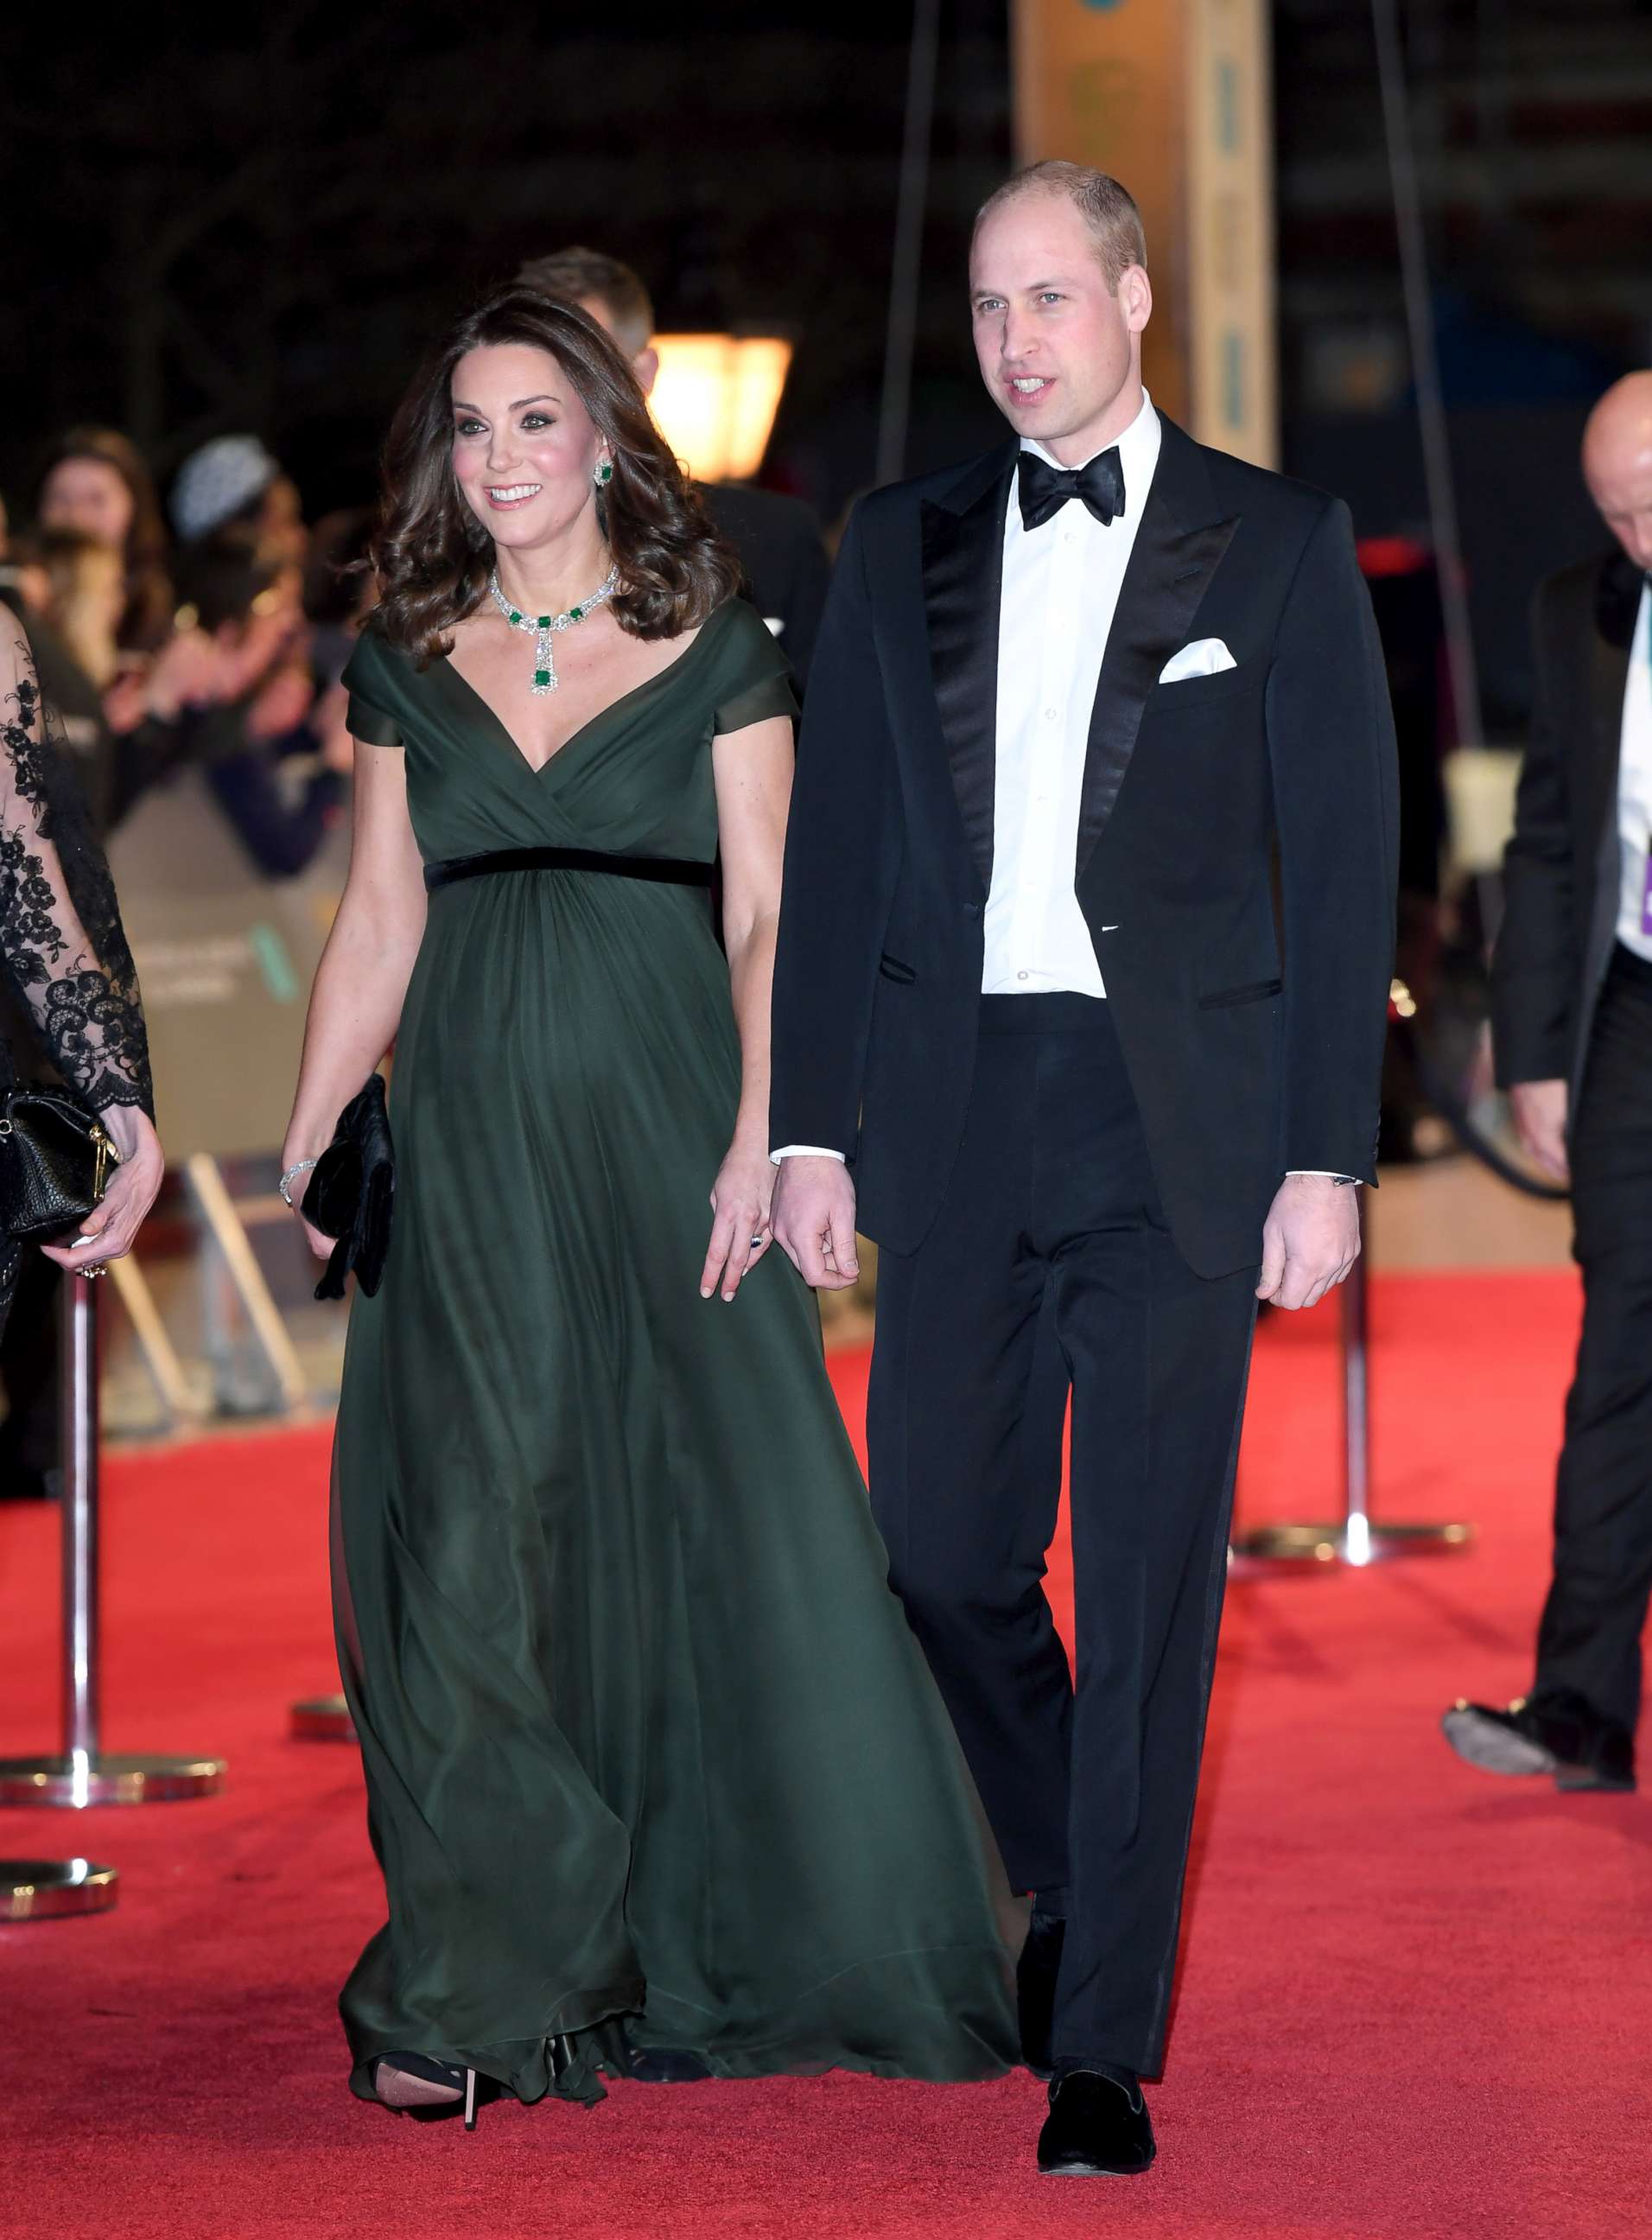 PHOTO: Catherine, Duchess of Cambridge and Prince William, Duke of Cambridge attend the EE British Academy Film Awards (BAFTAs) held at the Royal Albert Hall, Feb. 18, 2018 in London.